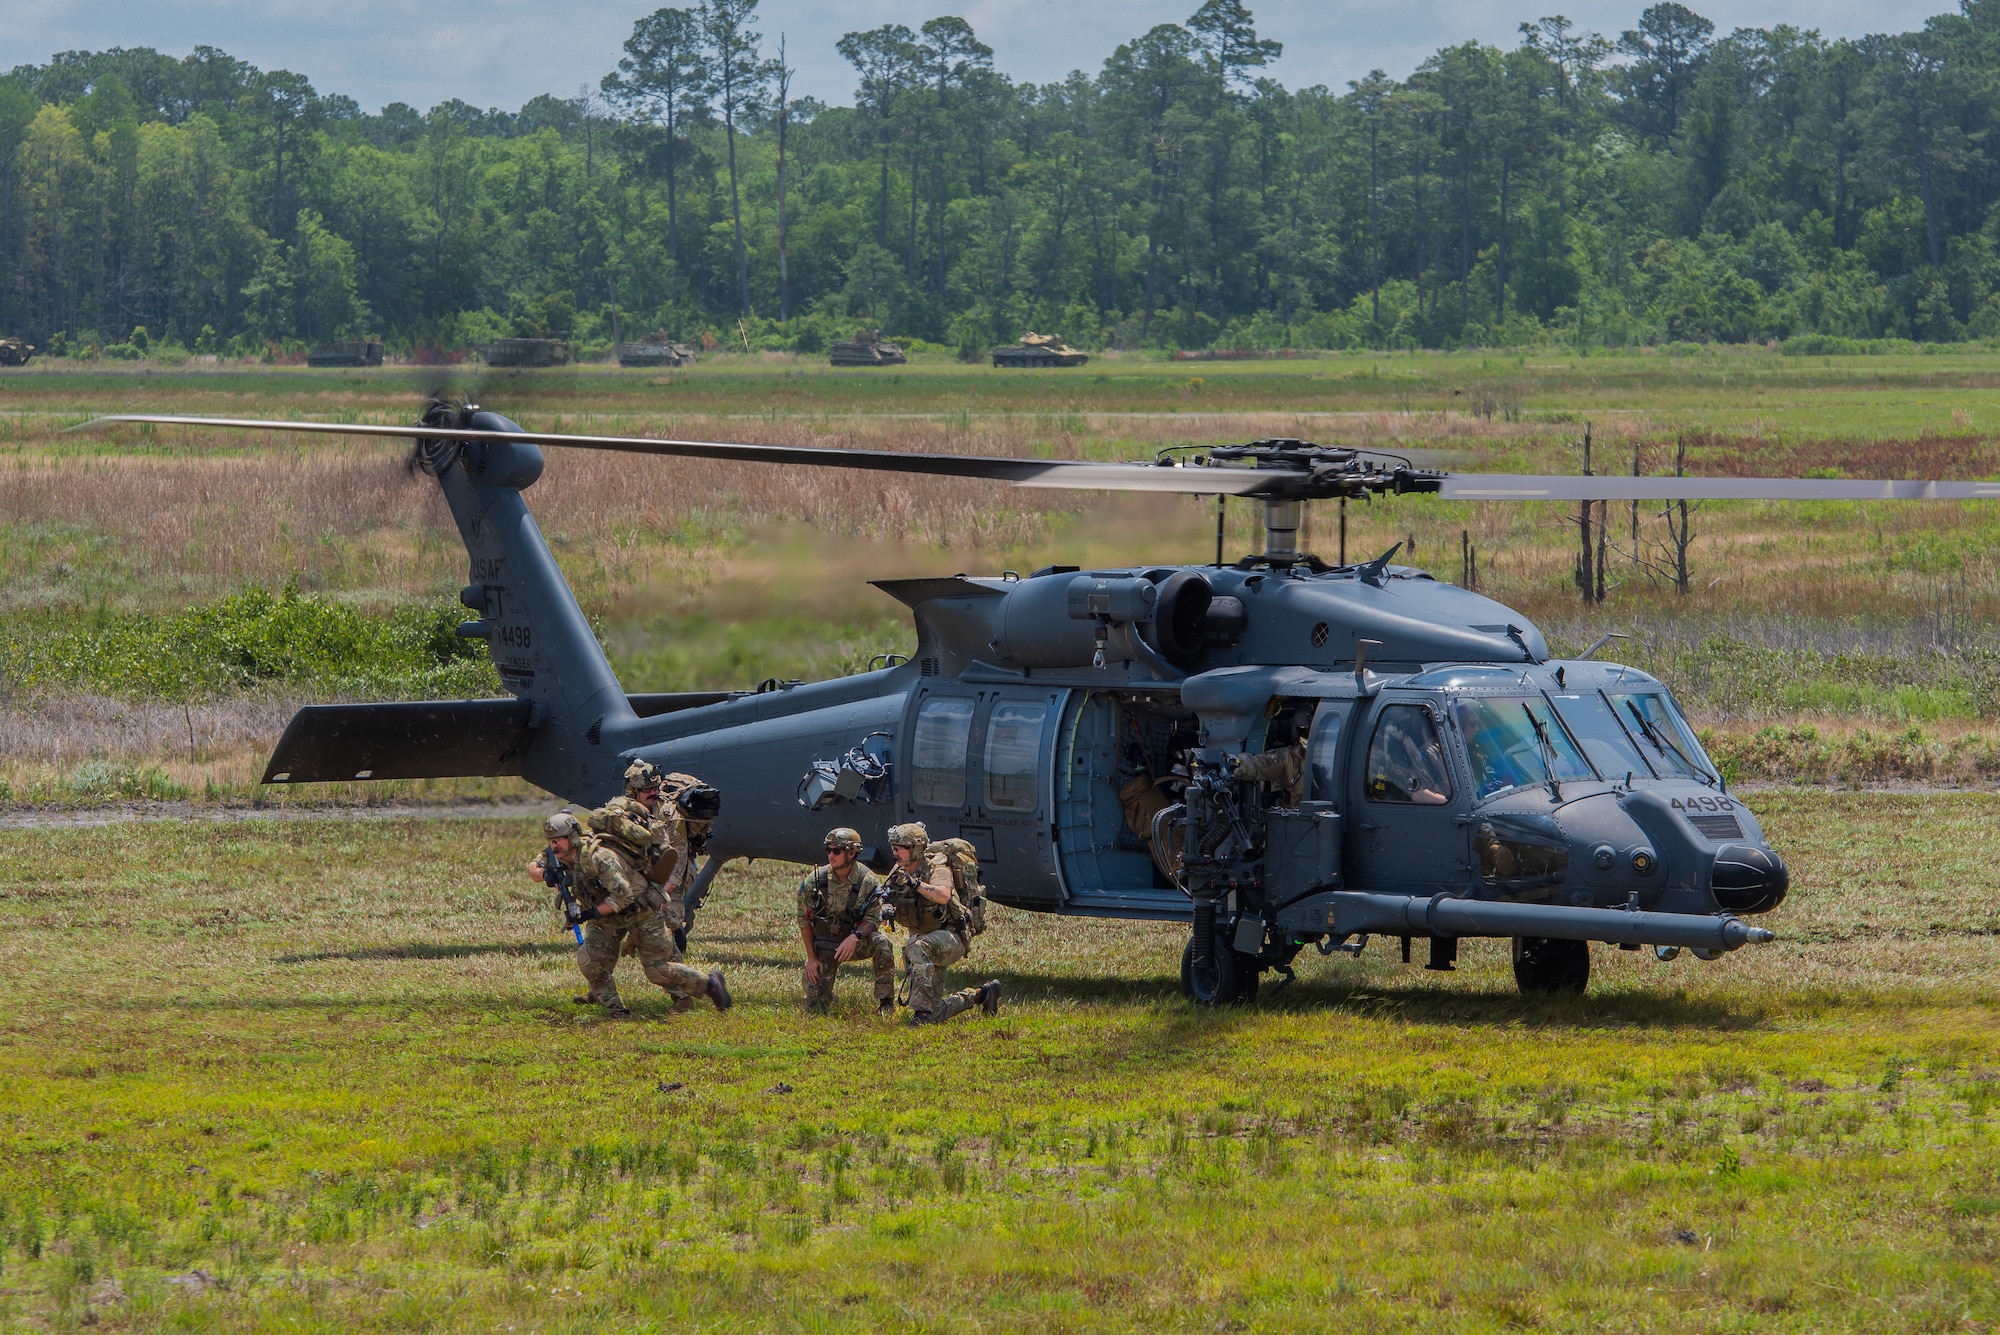 Airmen exiting helicopter